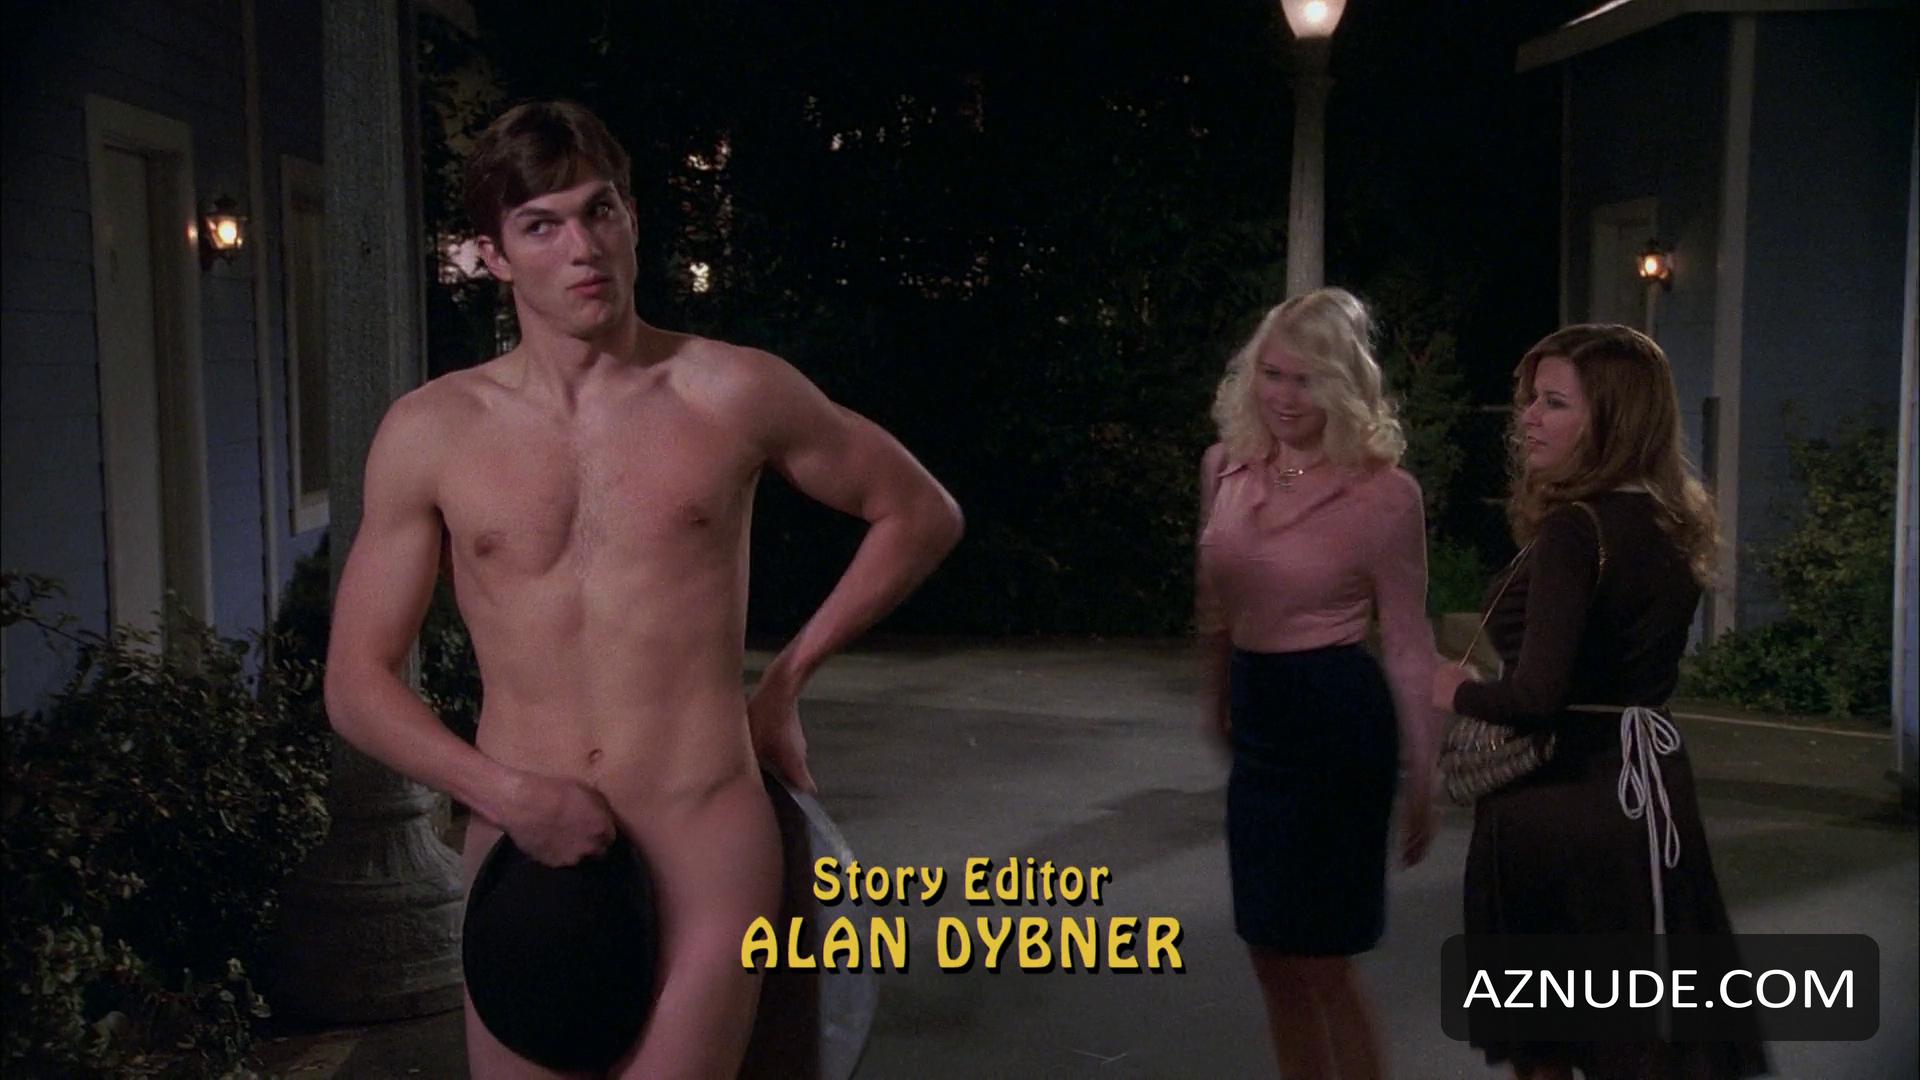 That 70's show nude